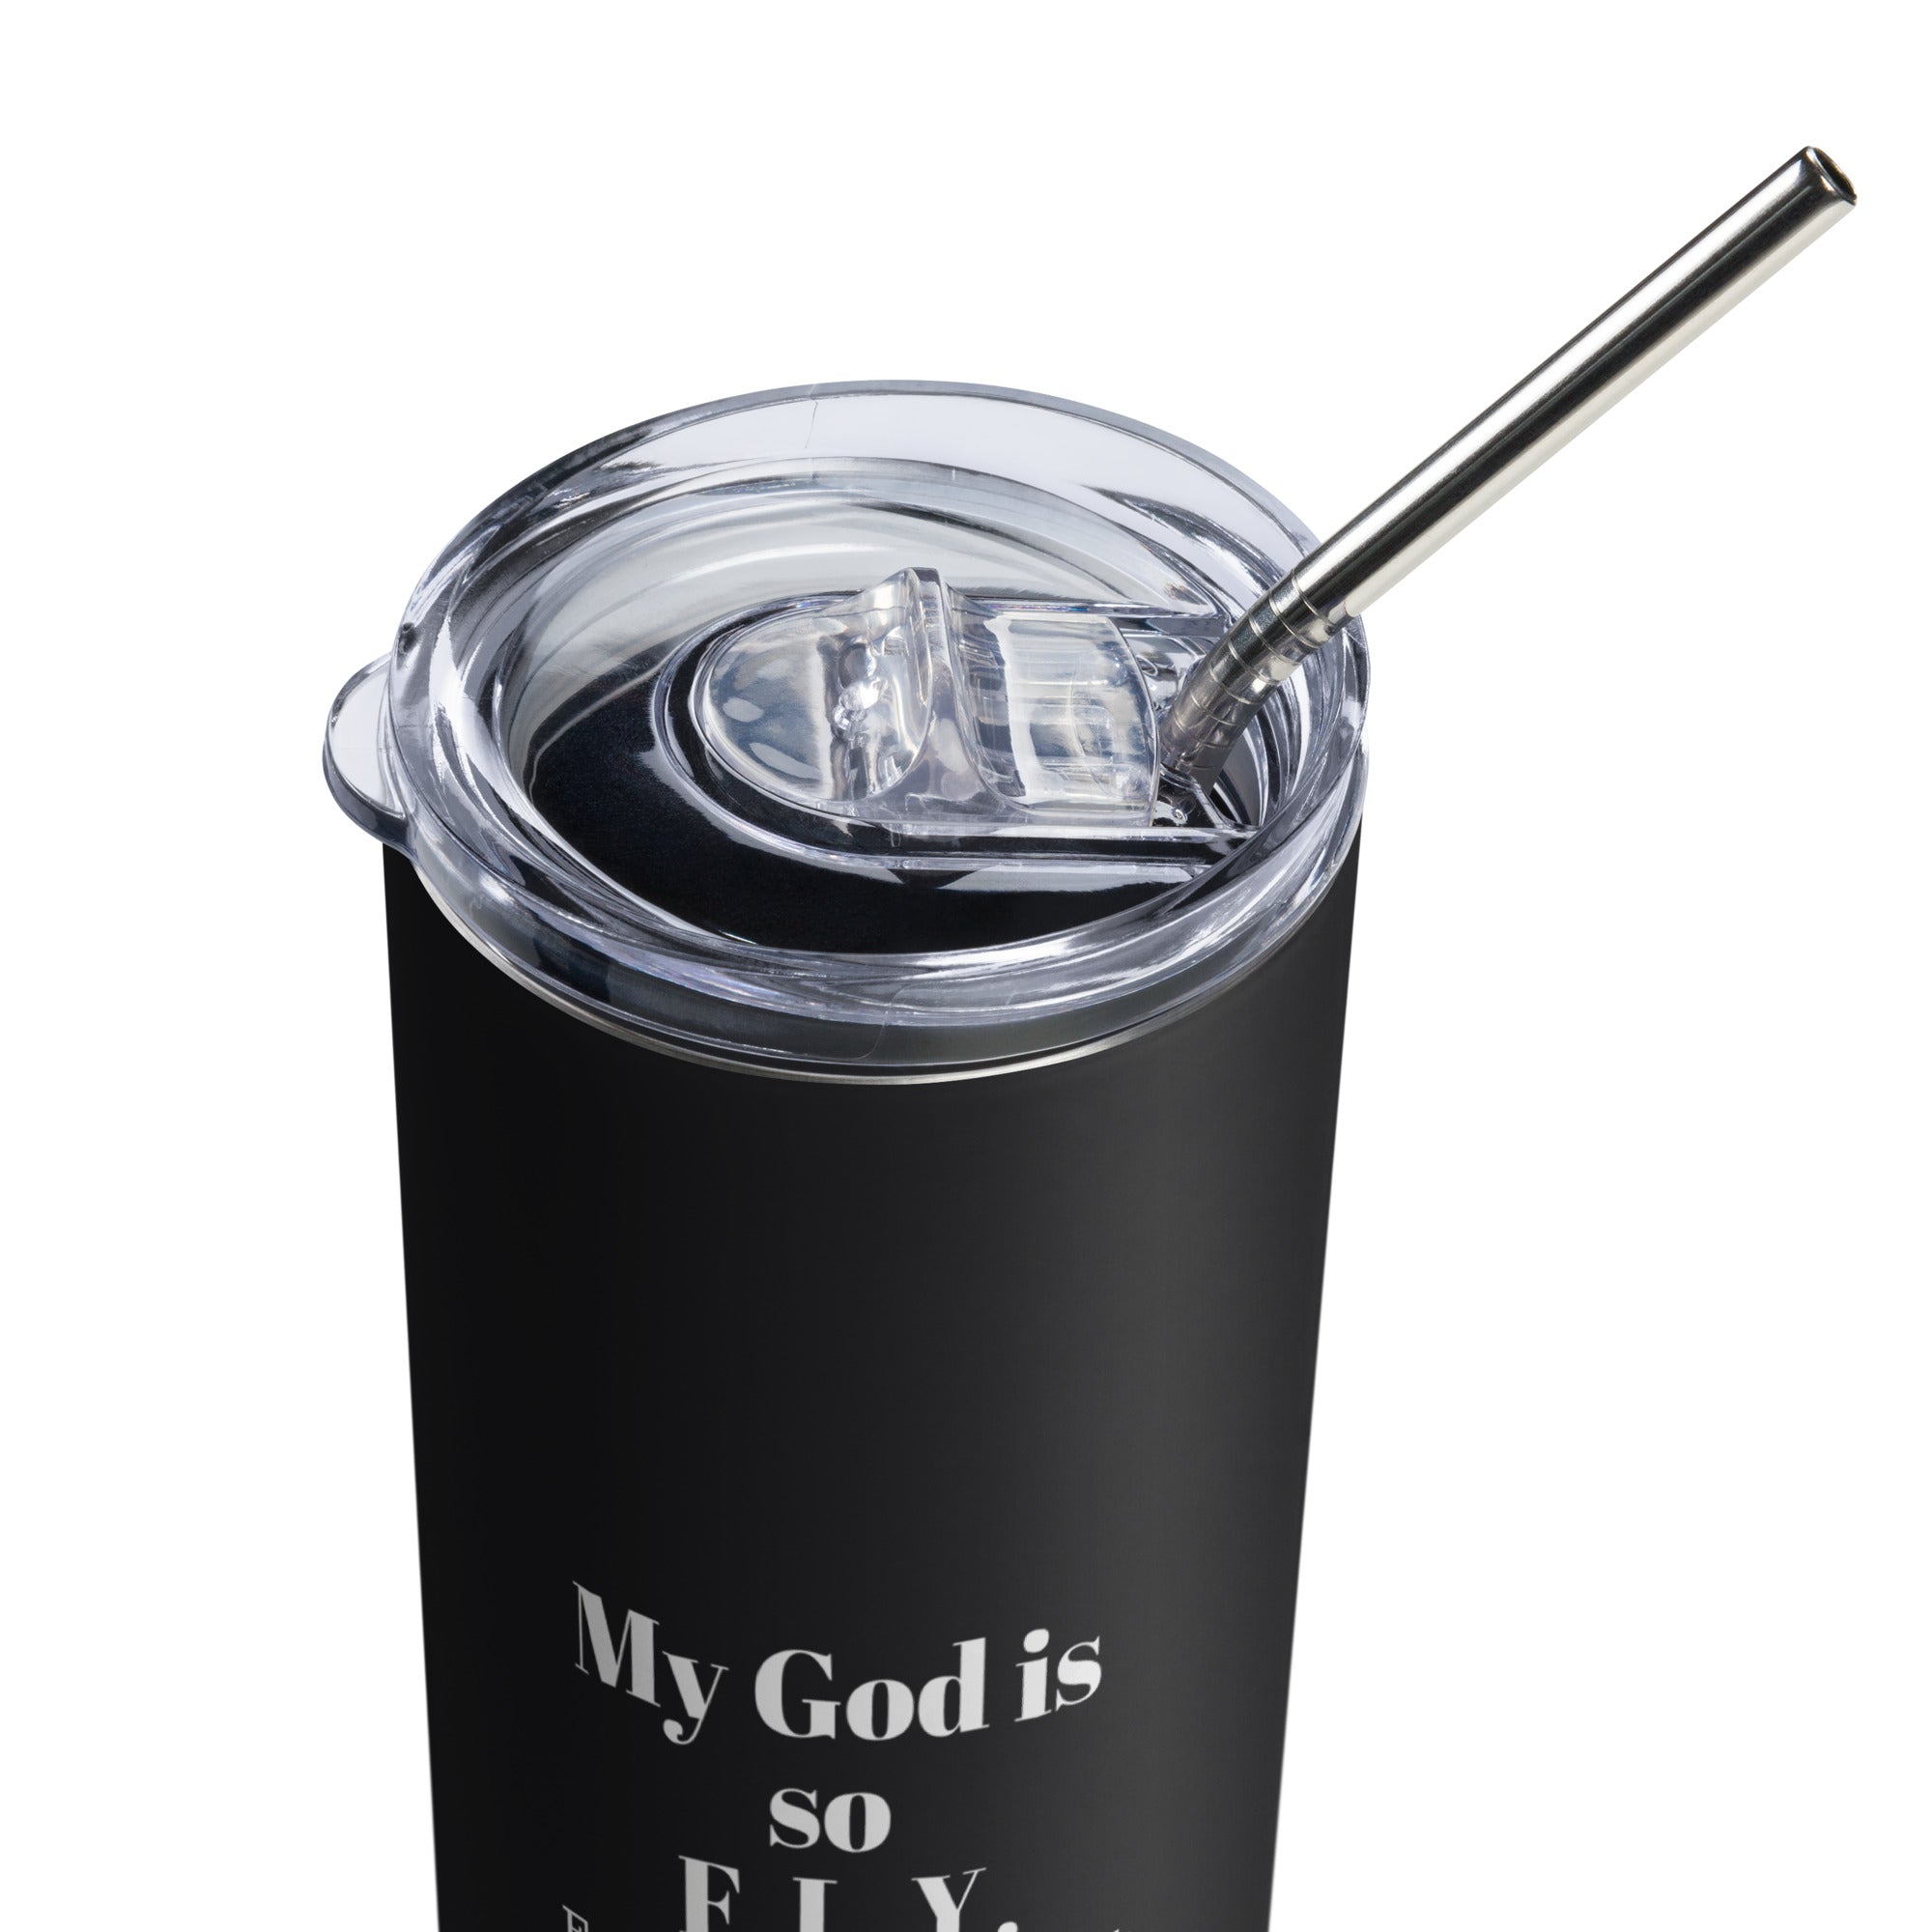 My God is So F.L.Y. Stainless Steel Tumbler - Black